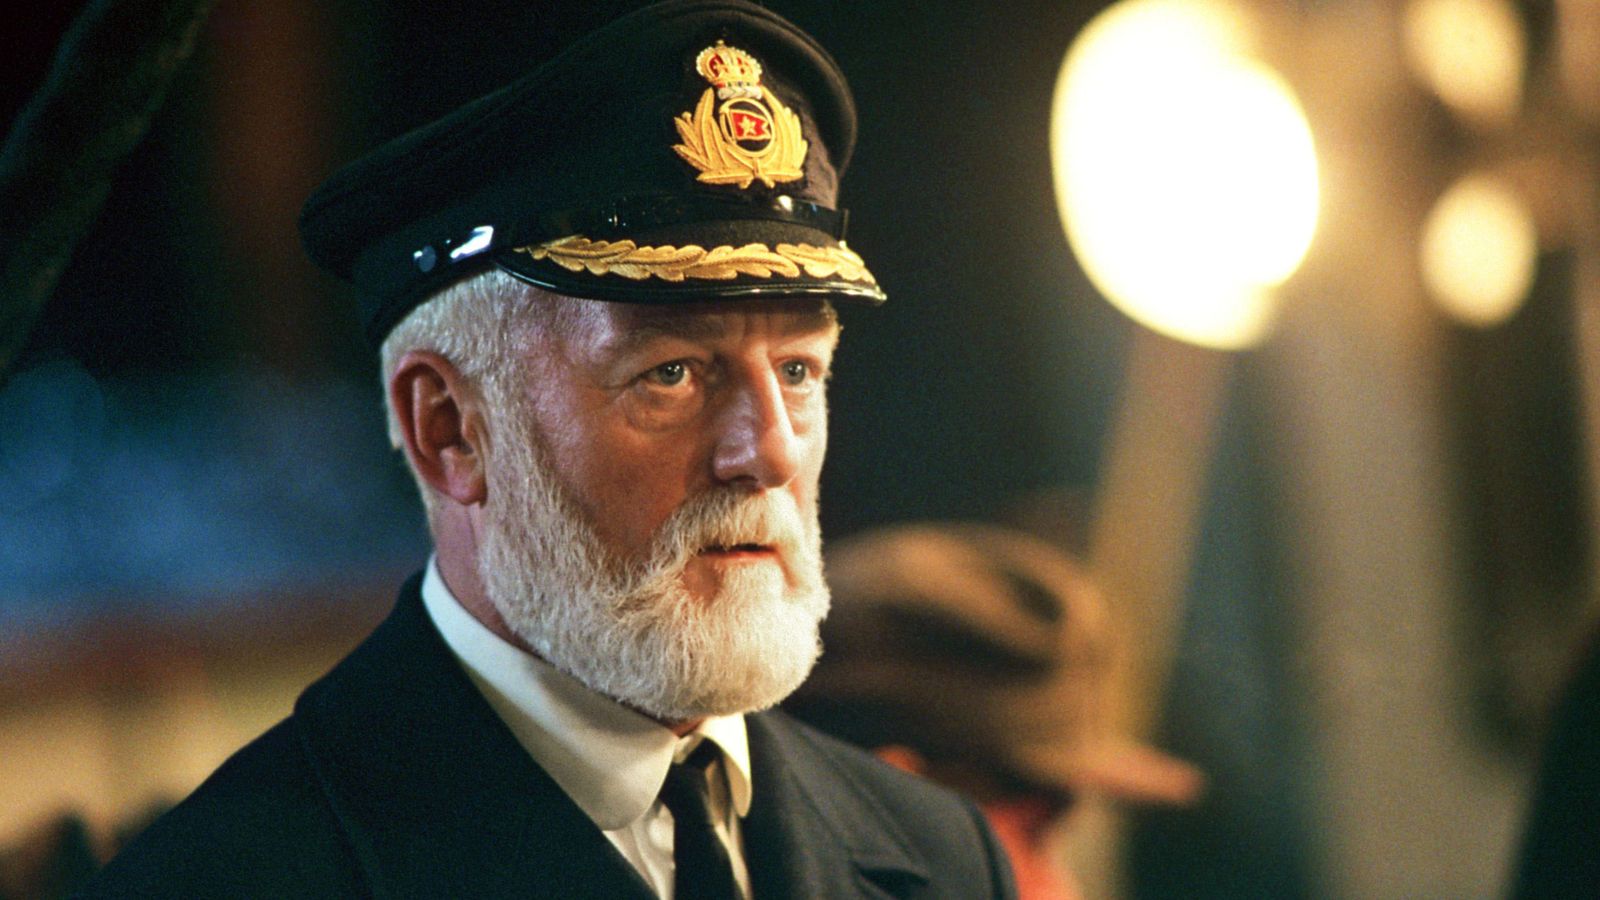 lord of the rings and titanic actor bernard hill dies